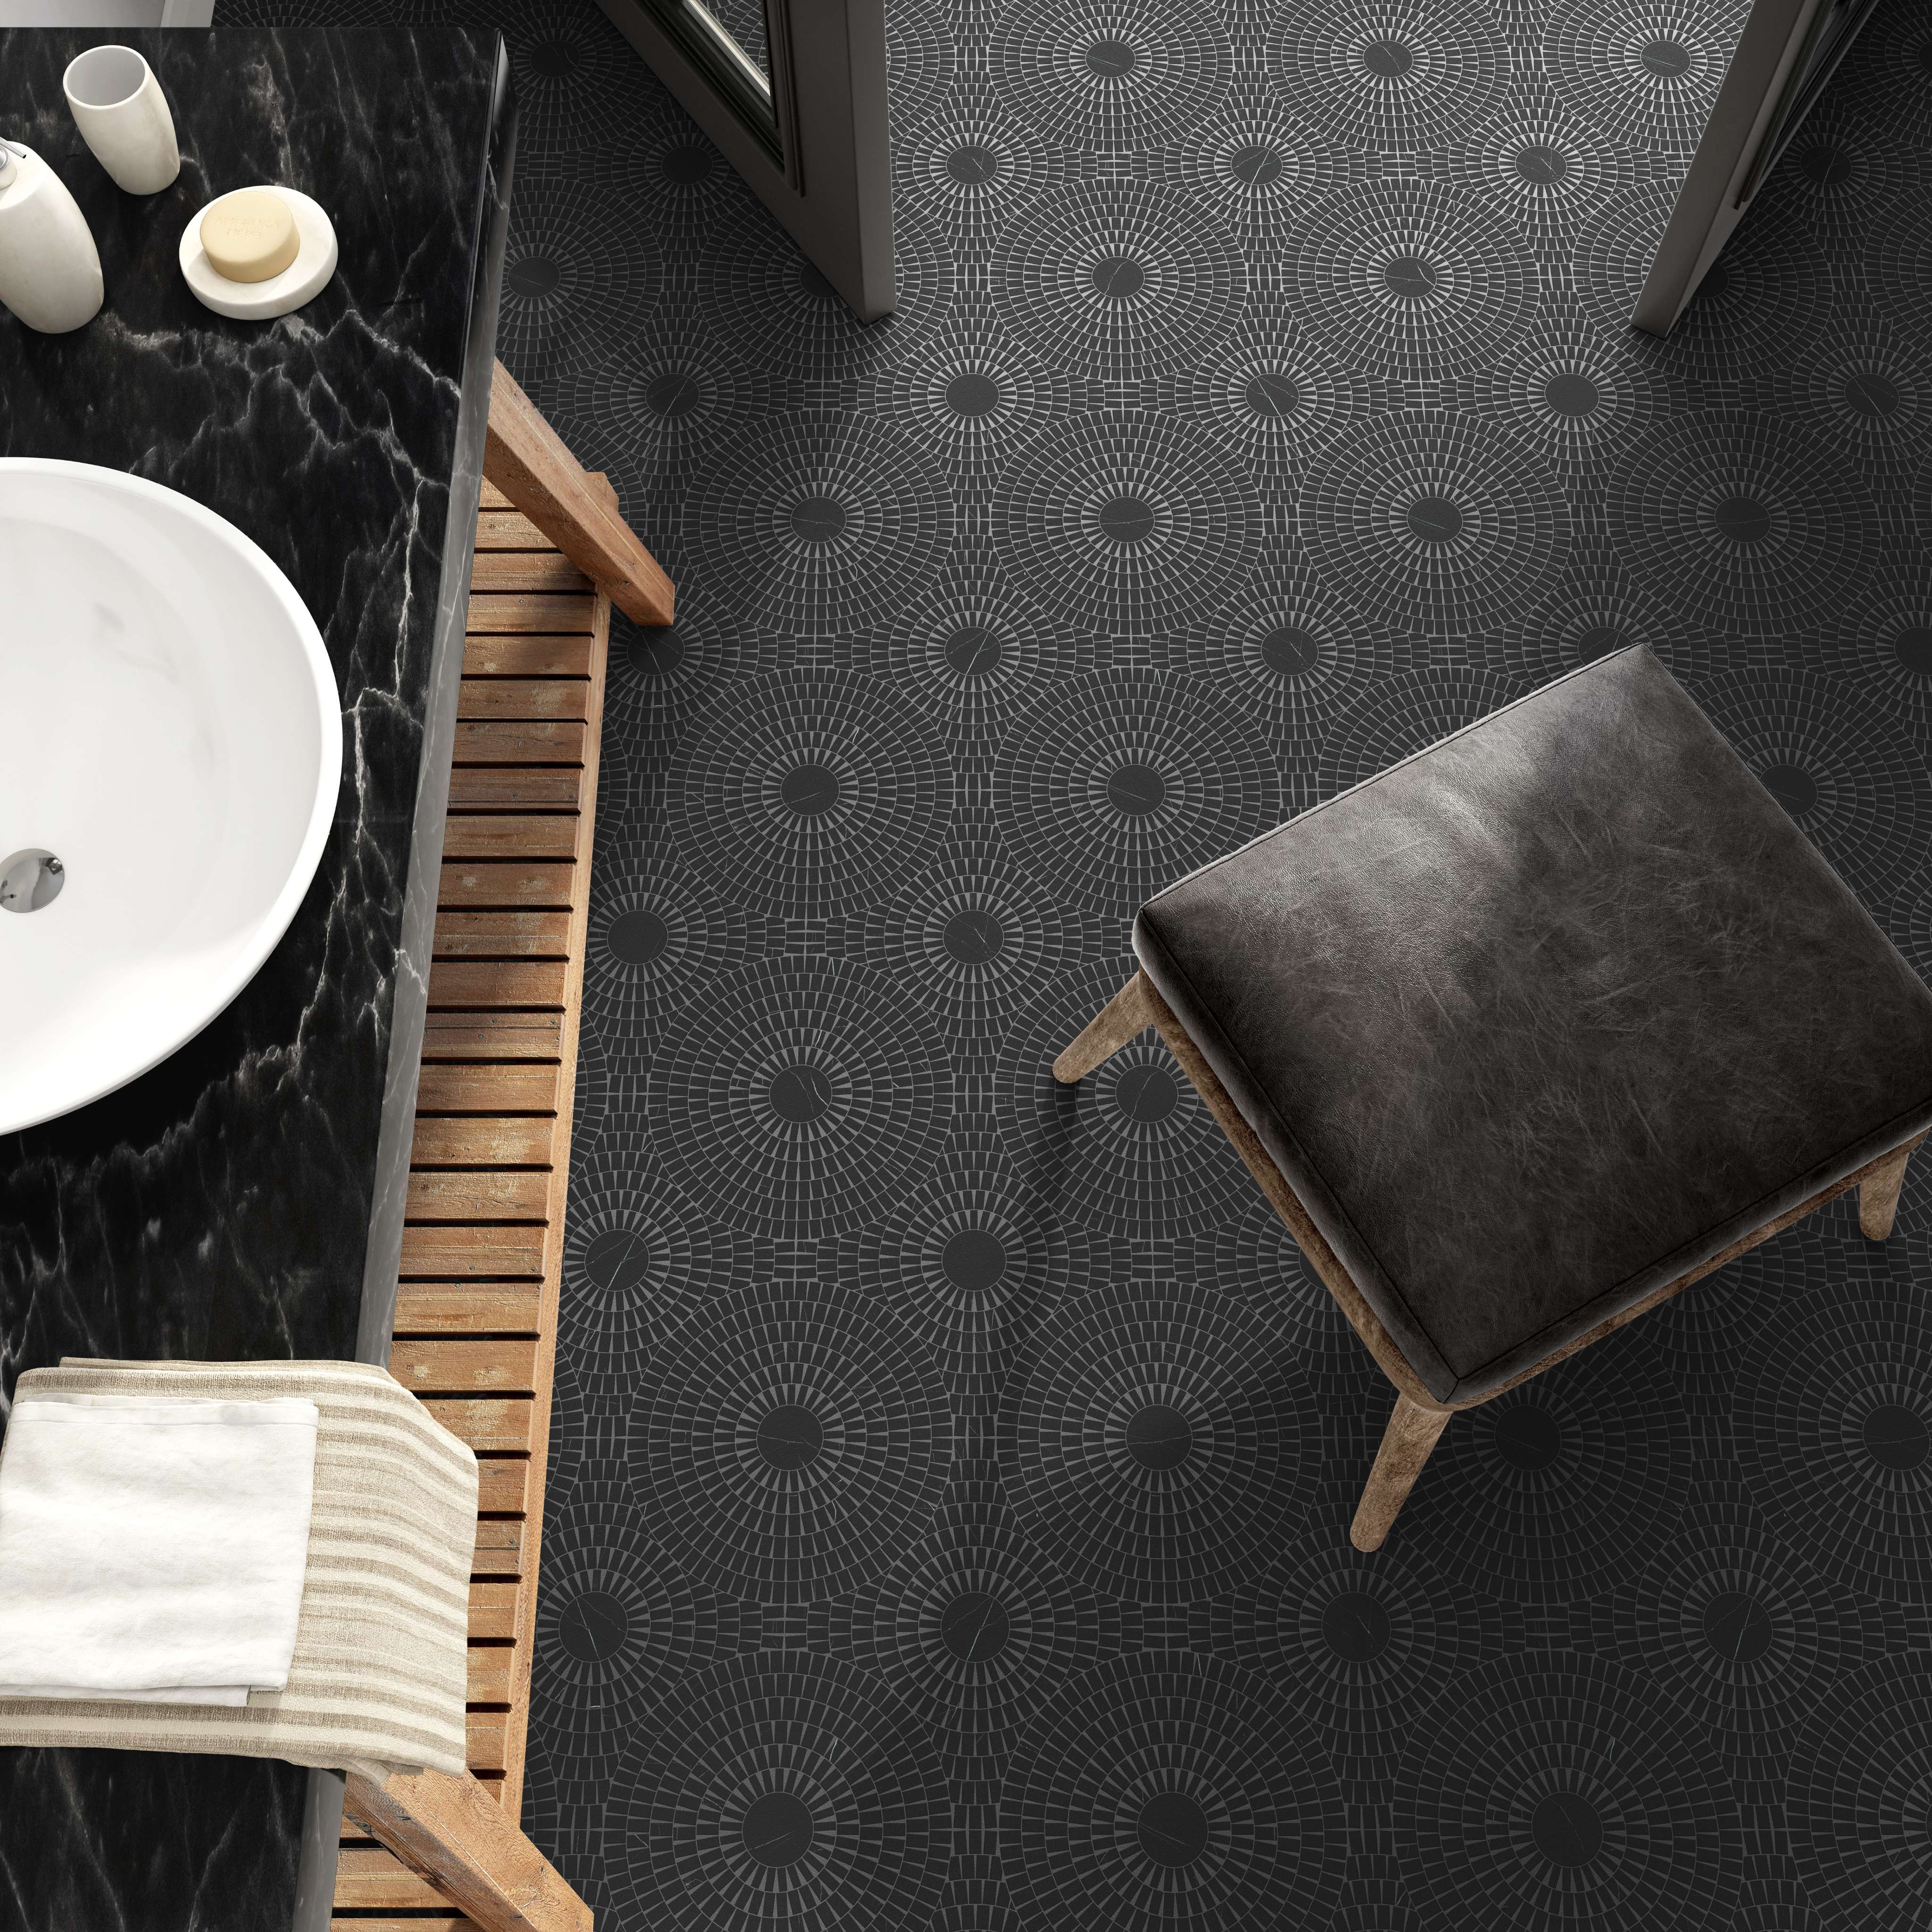 dulcet ripple black 1mrplblk natural stone mosaic interior 1 made by dulcet and sold by surface group international